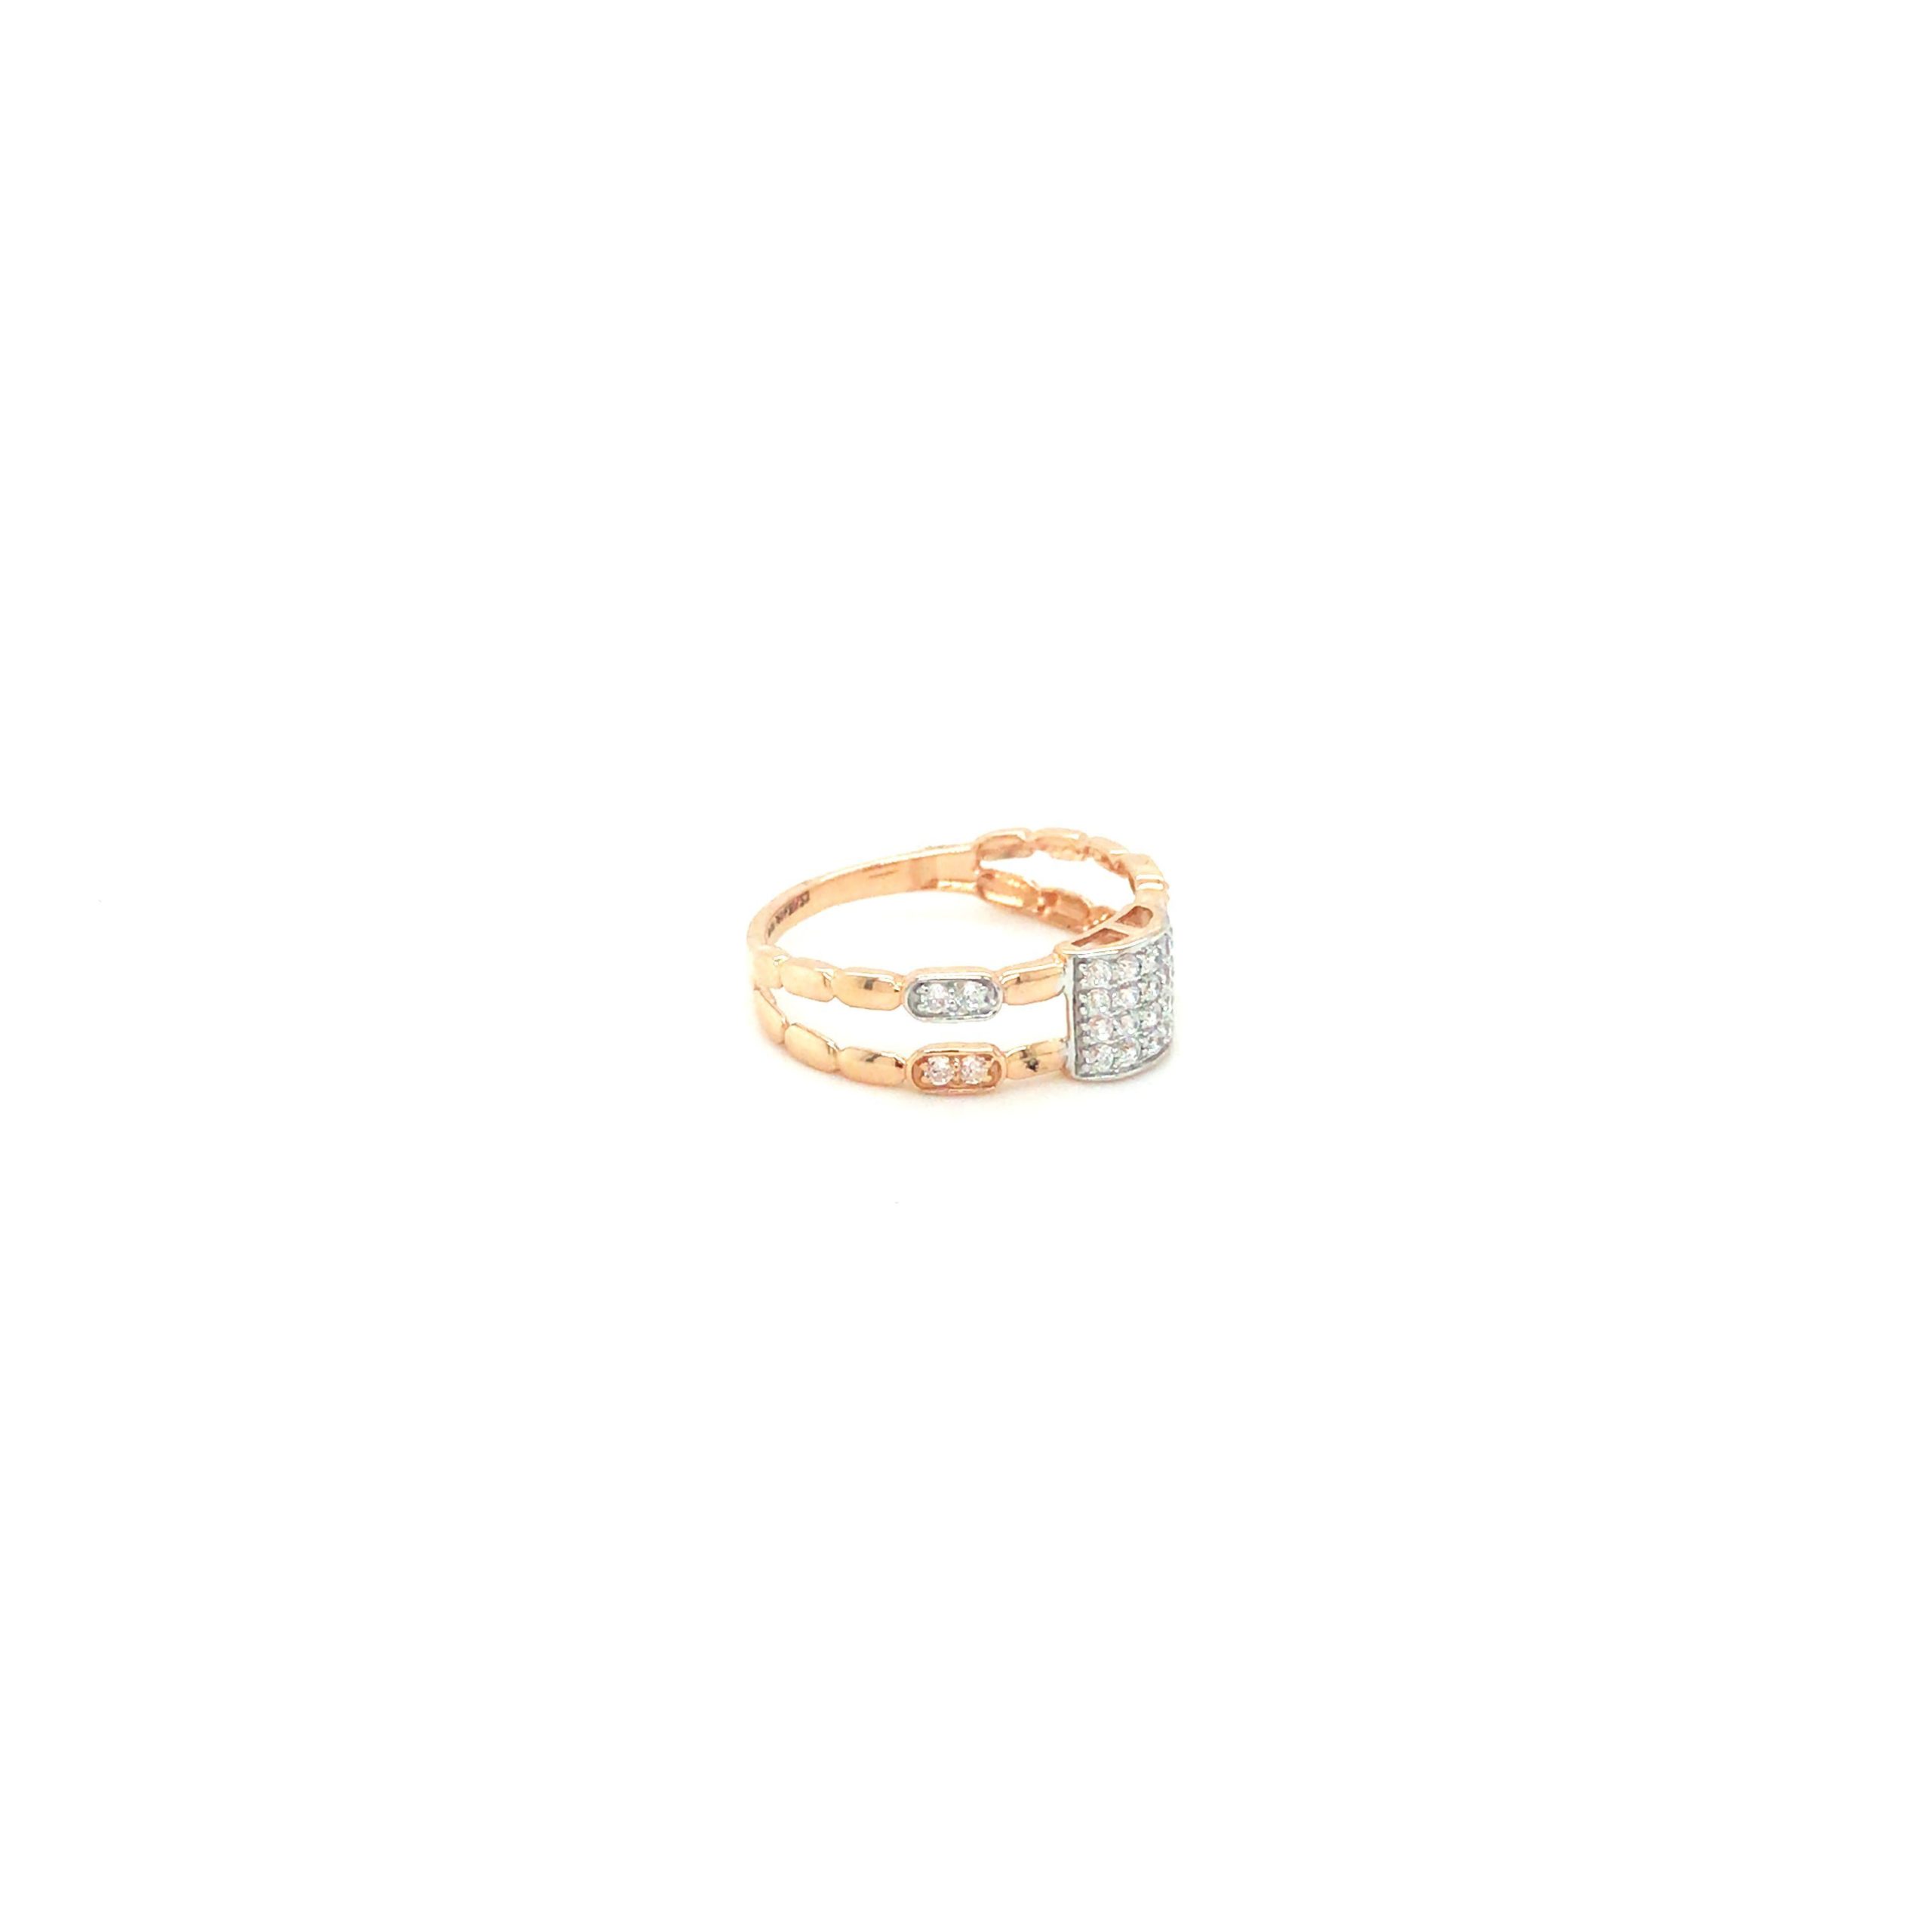 Buy SPARKLE Jewels The Crowd Favourite 14K Gold Diamond Ring for Women Girls  (White Gold-10) | IGI Certified Diamond | BIS Hallmarked Gold at Amazon.in